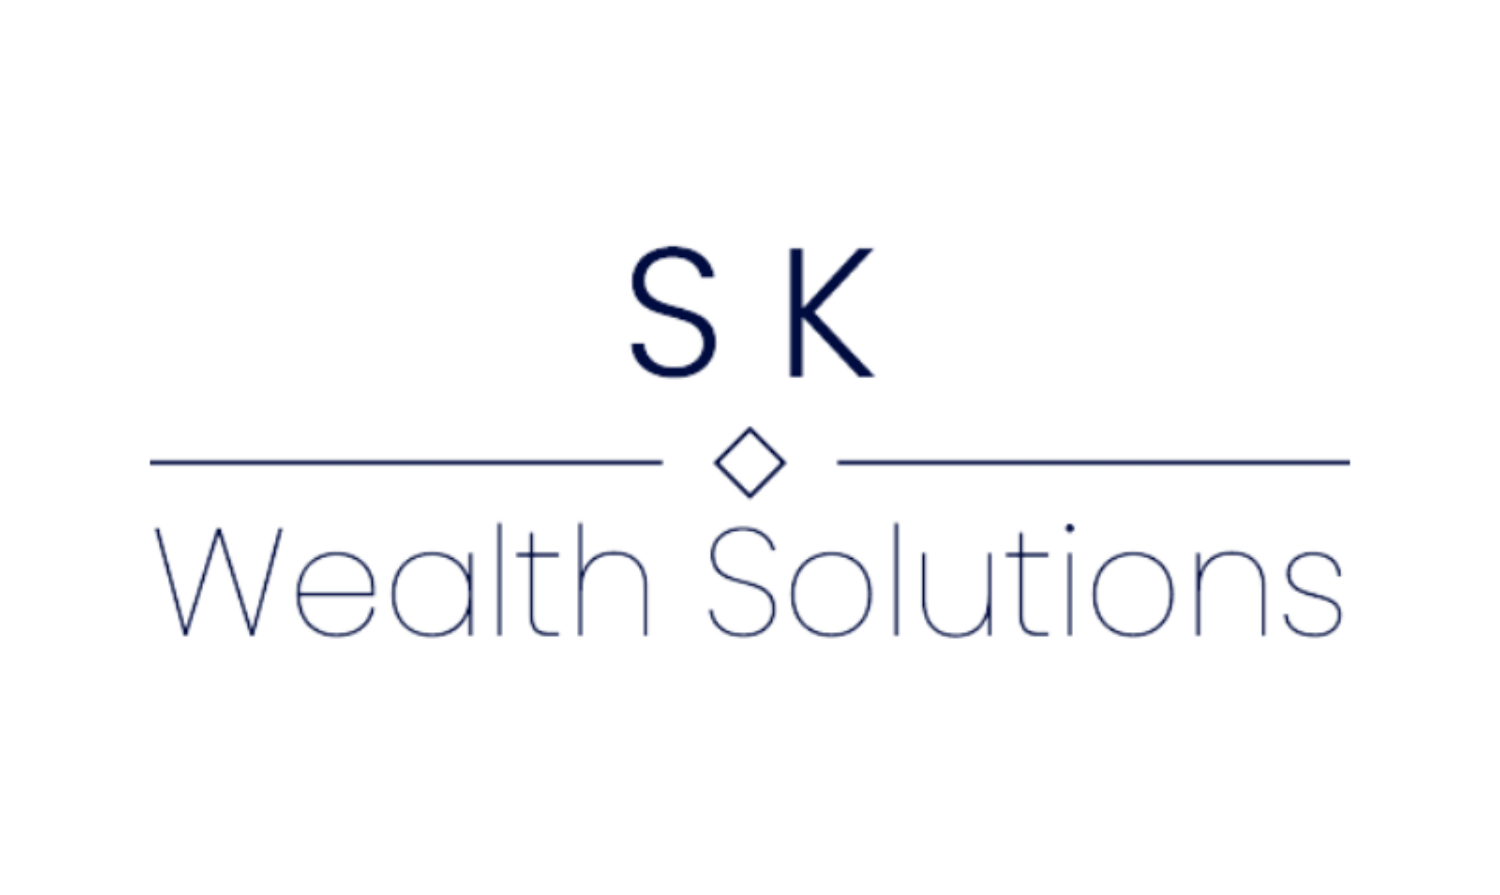 connect-corporate-networking-member-logo-sk-wealth